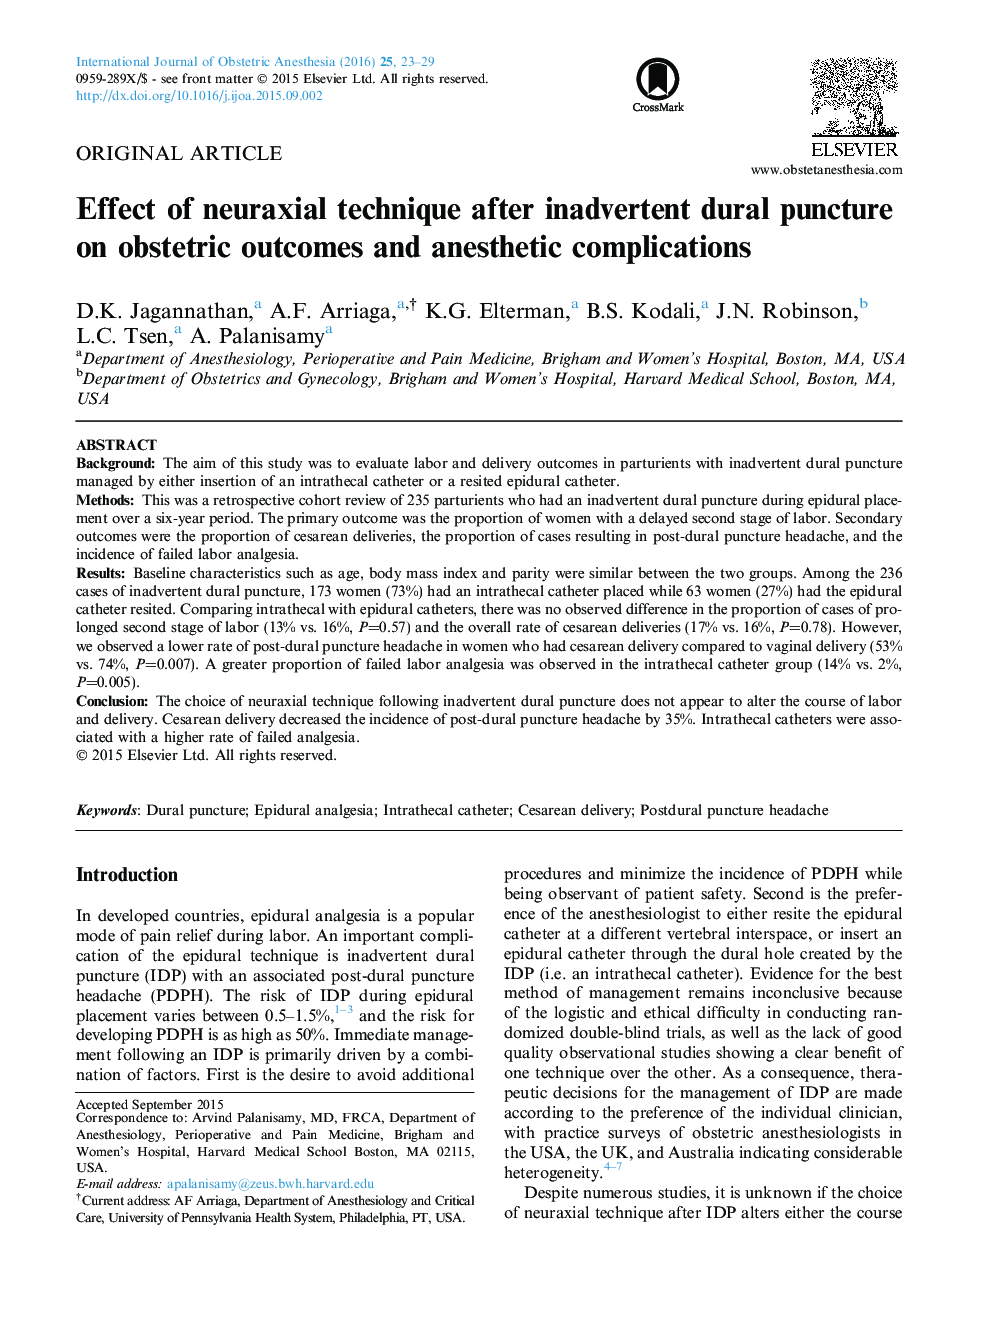 Effect of neuraxial technique after inadvertent dural puncture on obstetric outcomes and anesthetic complications